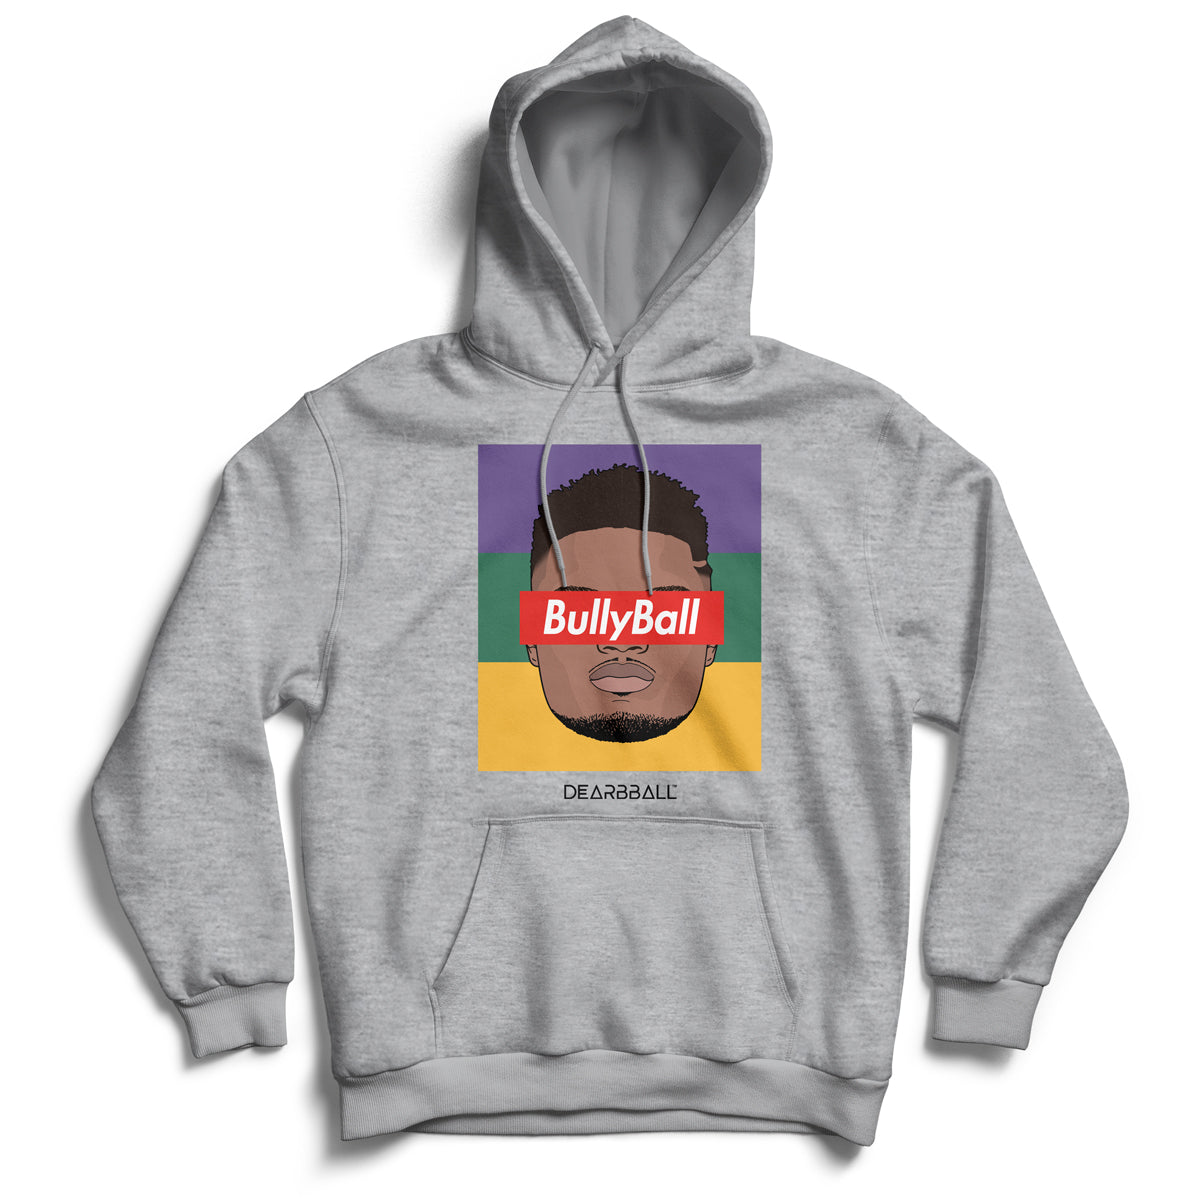 Zion_Williamson_hoodie_BULLYBALL_Tricolor_New_Orleans_Pelicans_Dearbball_black